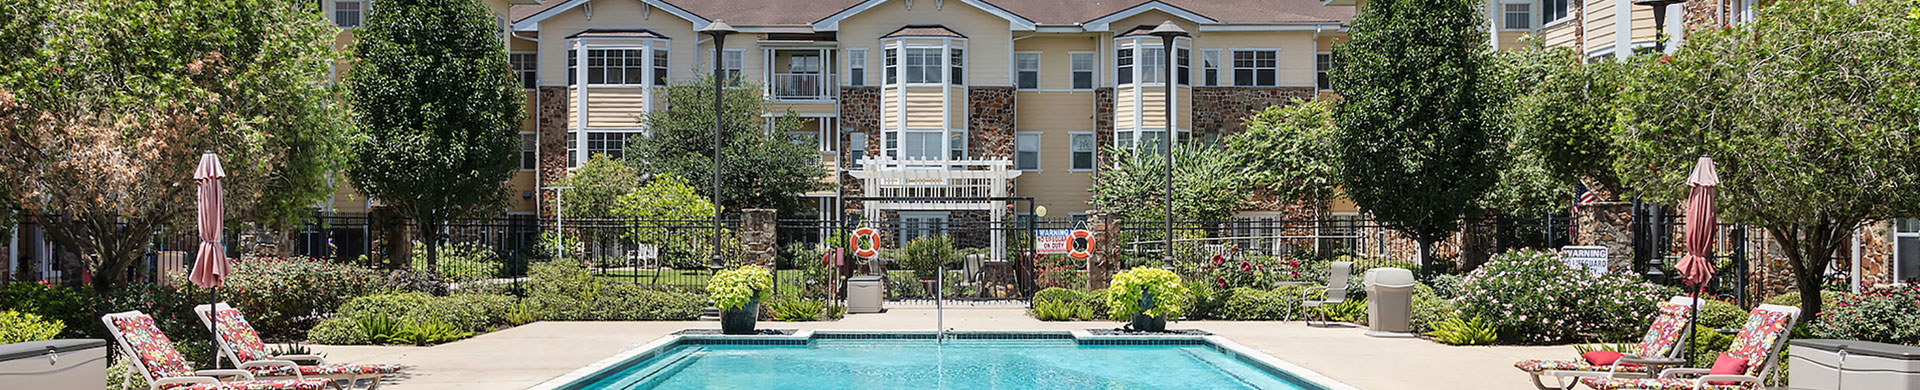 About Our Retirement Community The Village at Gleannloch Farms